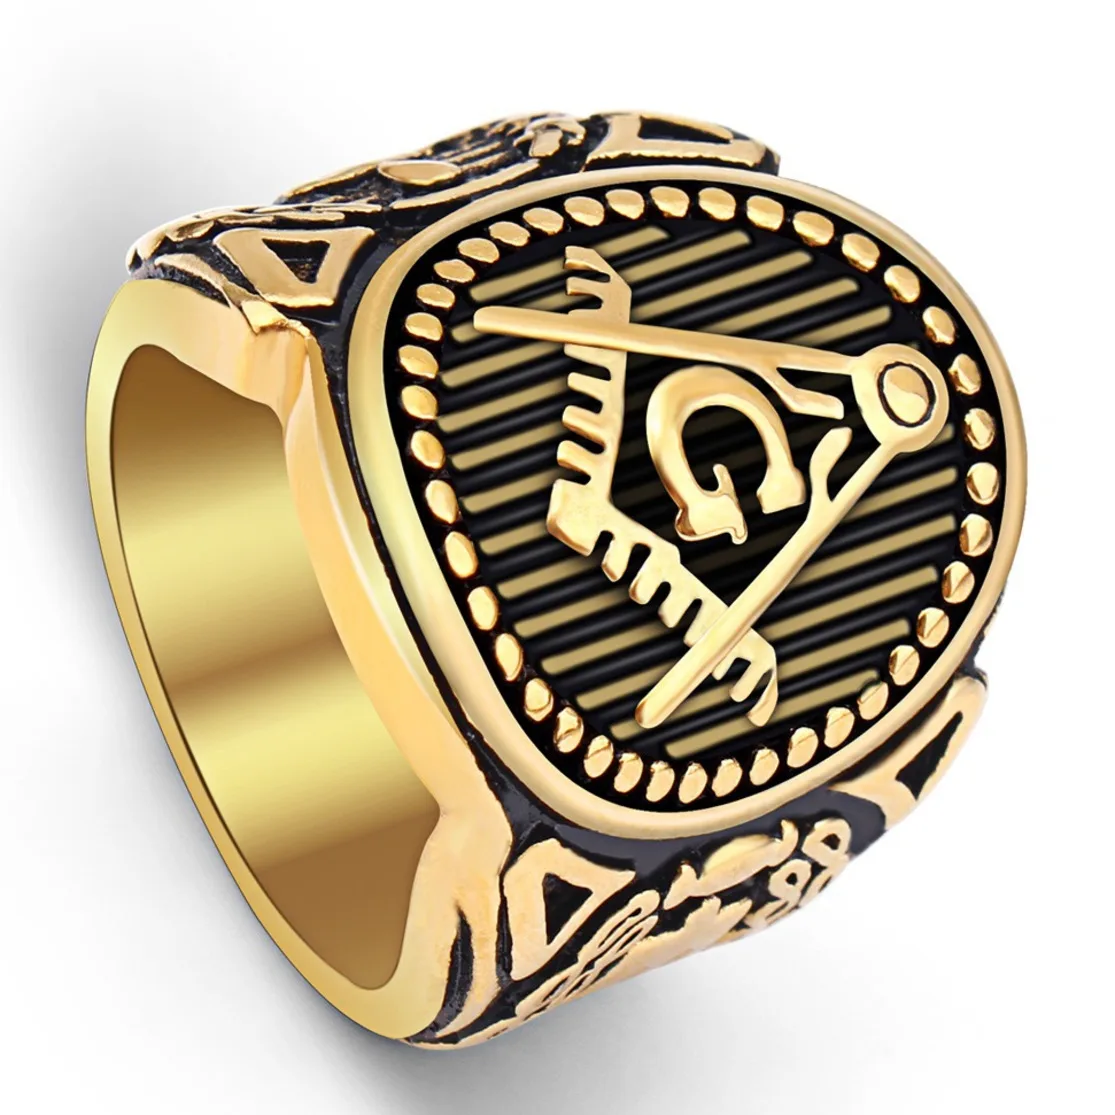 Bloodstone Masonic Ring Overlaid Set Square And Compass 18 k Gold Plated  Sterling Silver 925 - The Regnas Collection